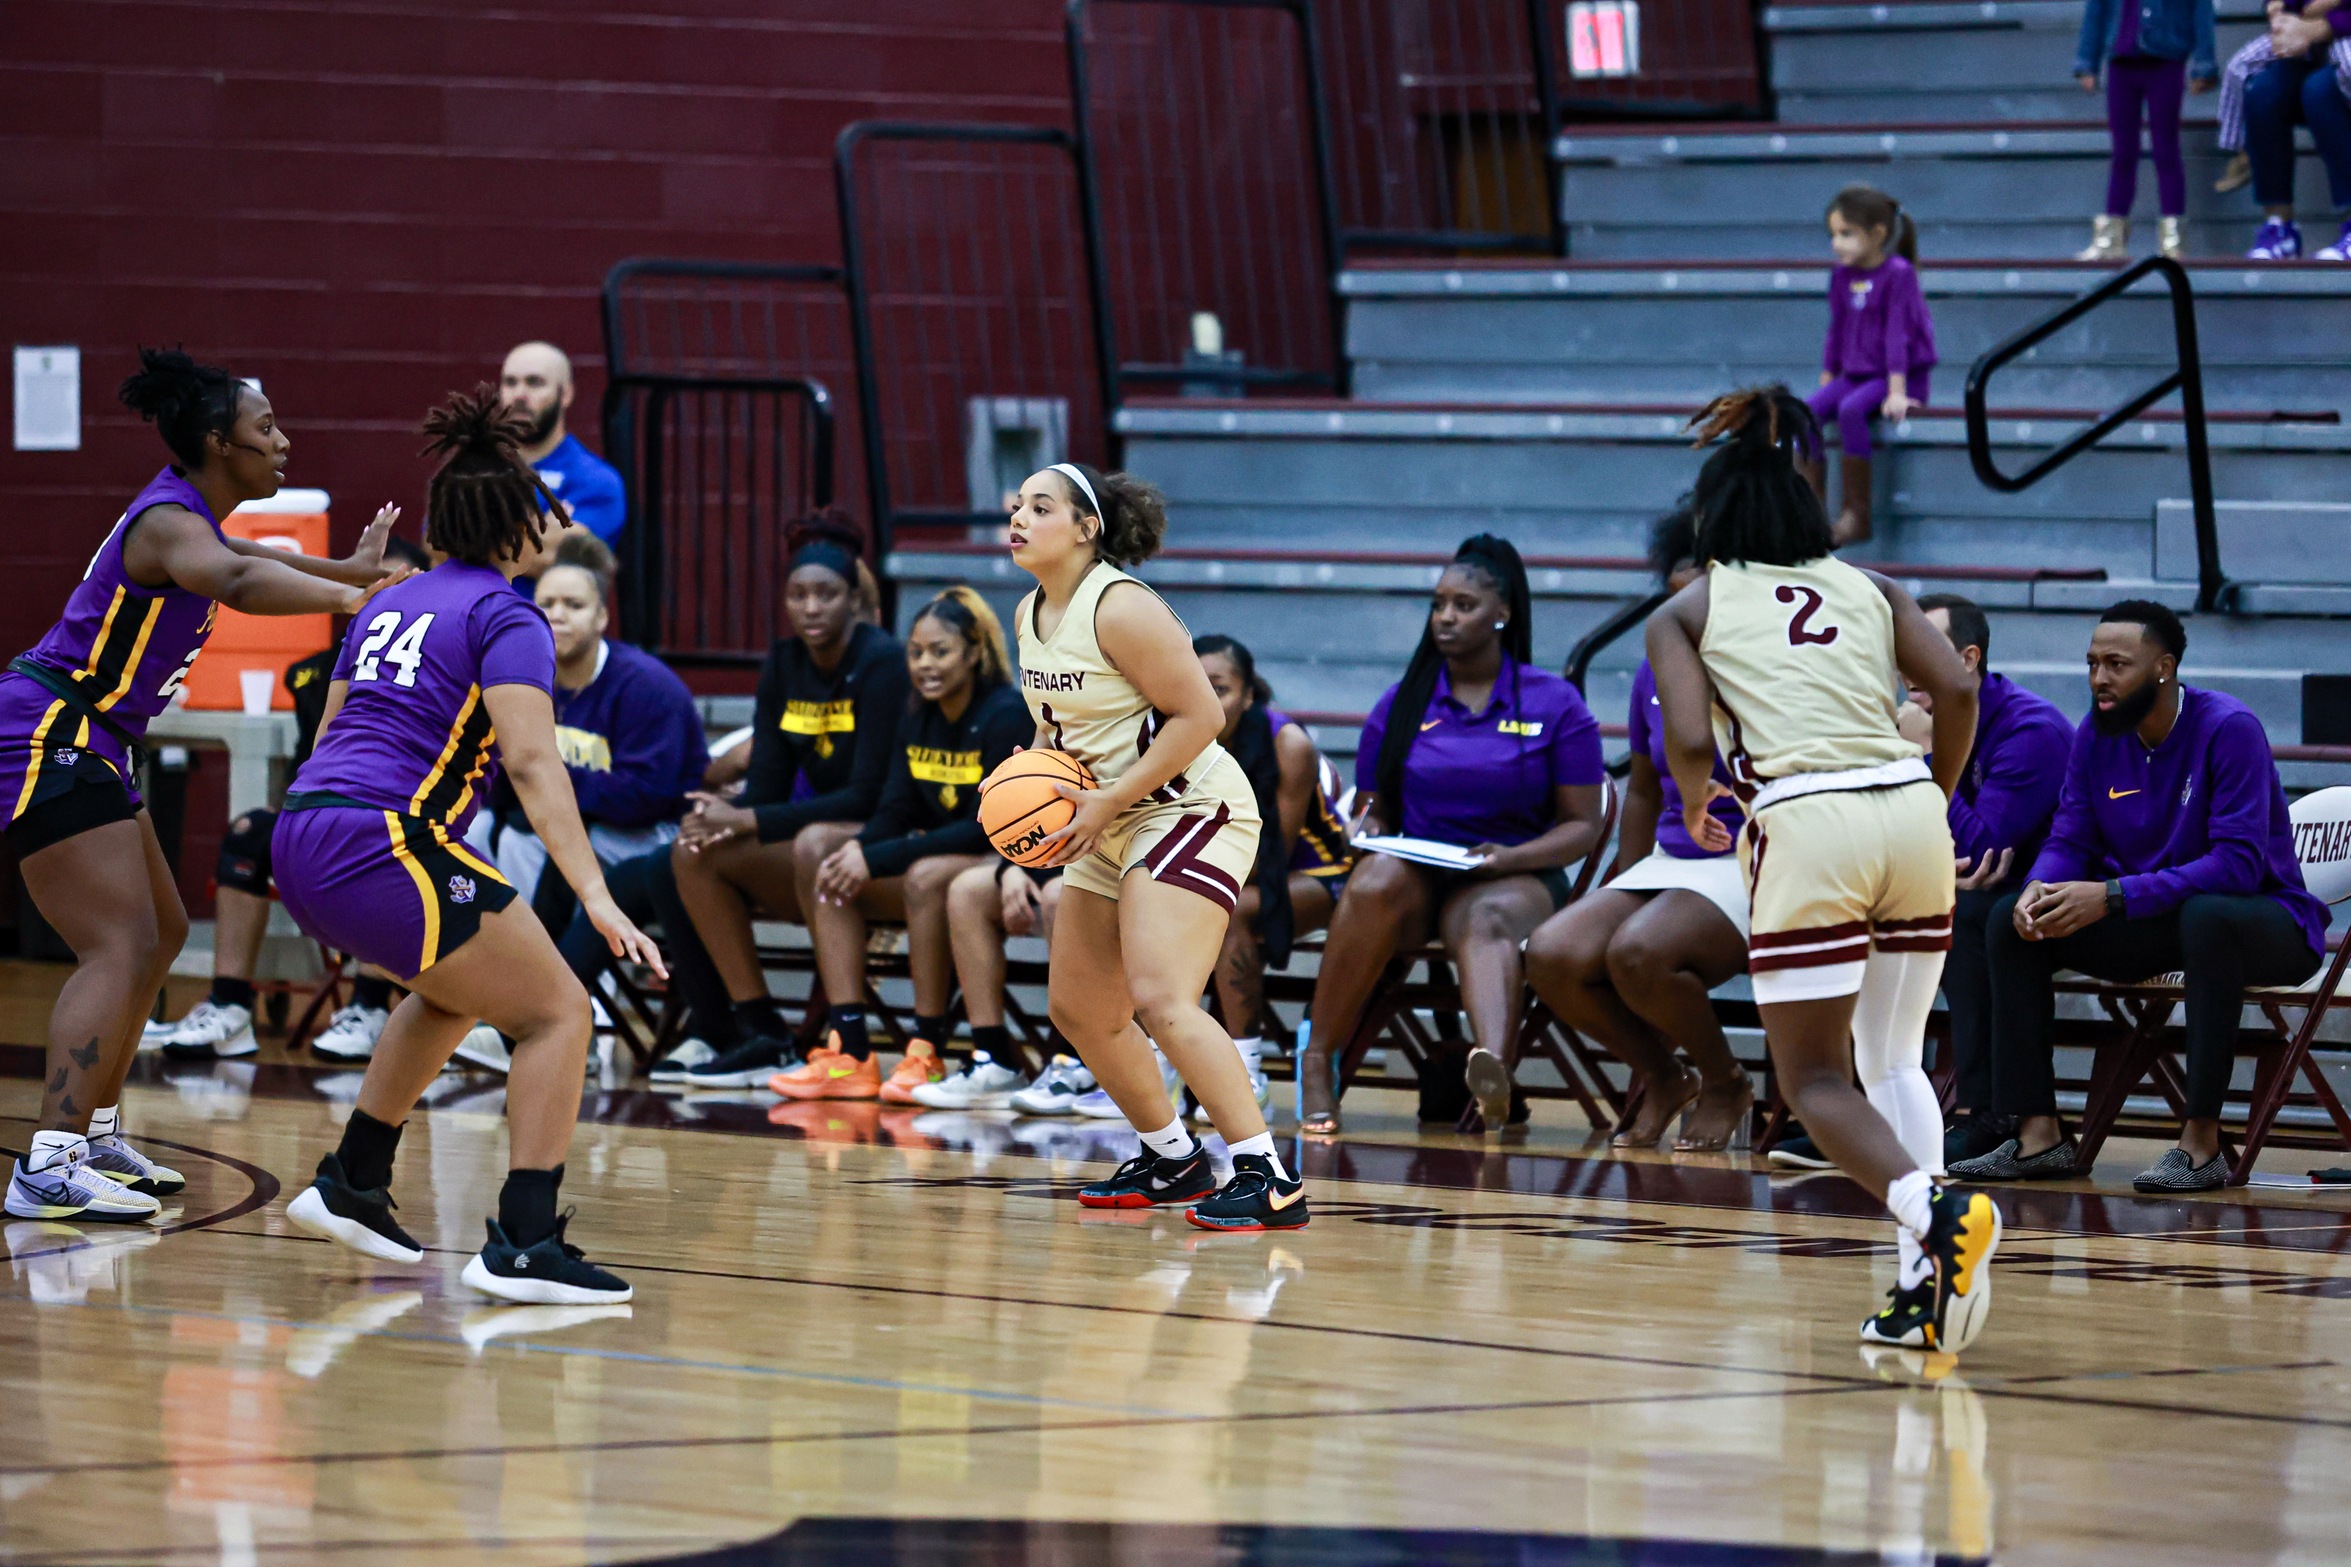 Sophomore F Layla Powell and the Ladies fell 69-35 at Wiley on Saturday.

PHOTO: Isabell Gonzales, Centenary student